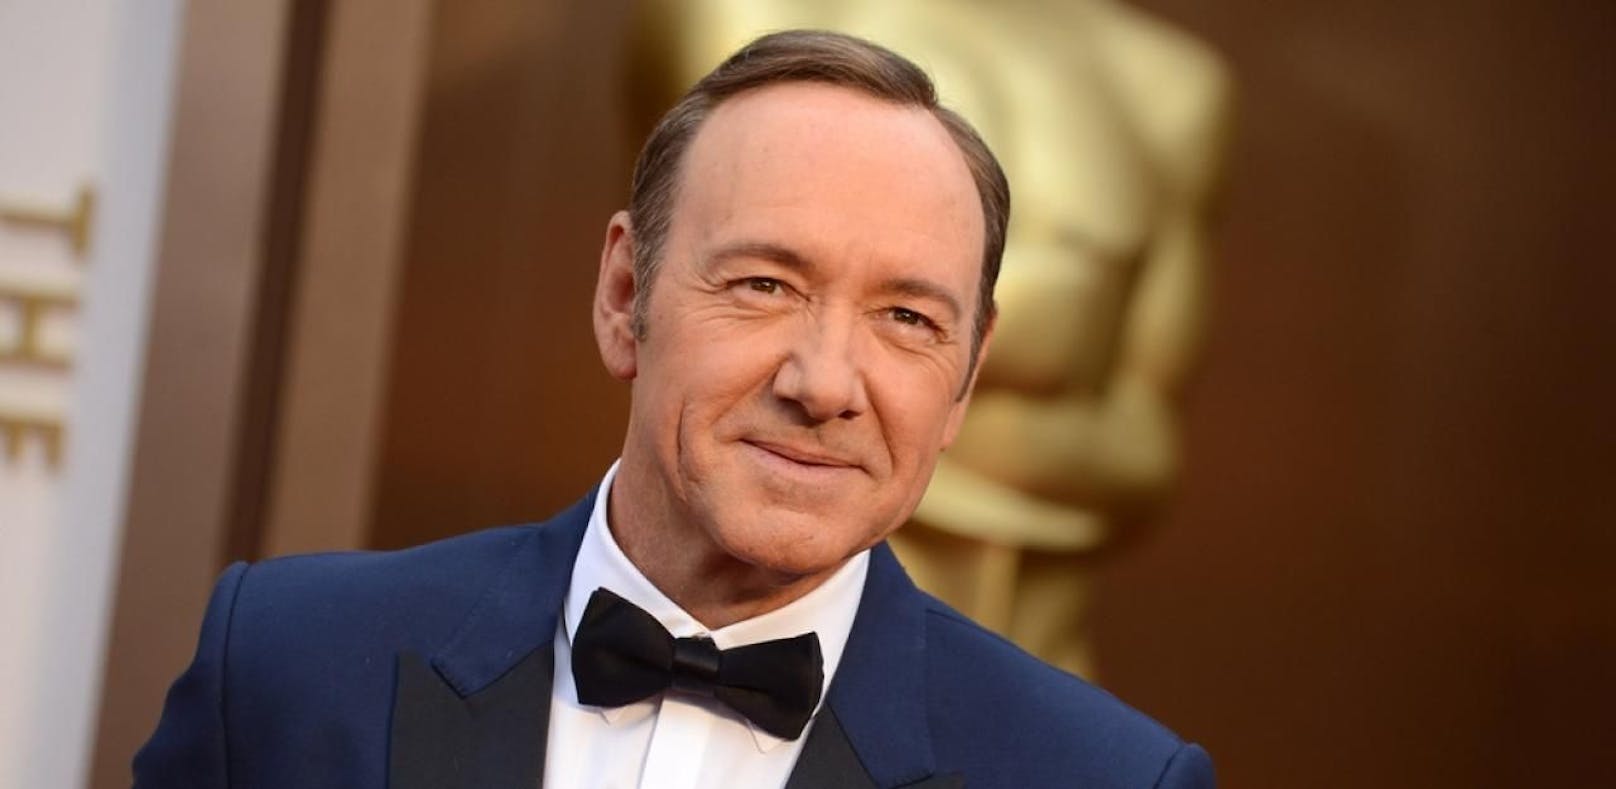 "House of Cards"-Star outet sich auf Twitter